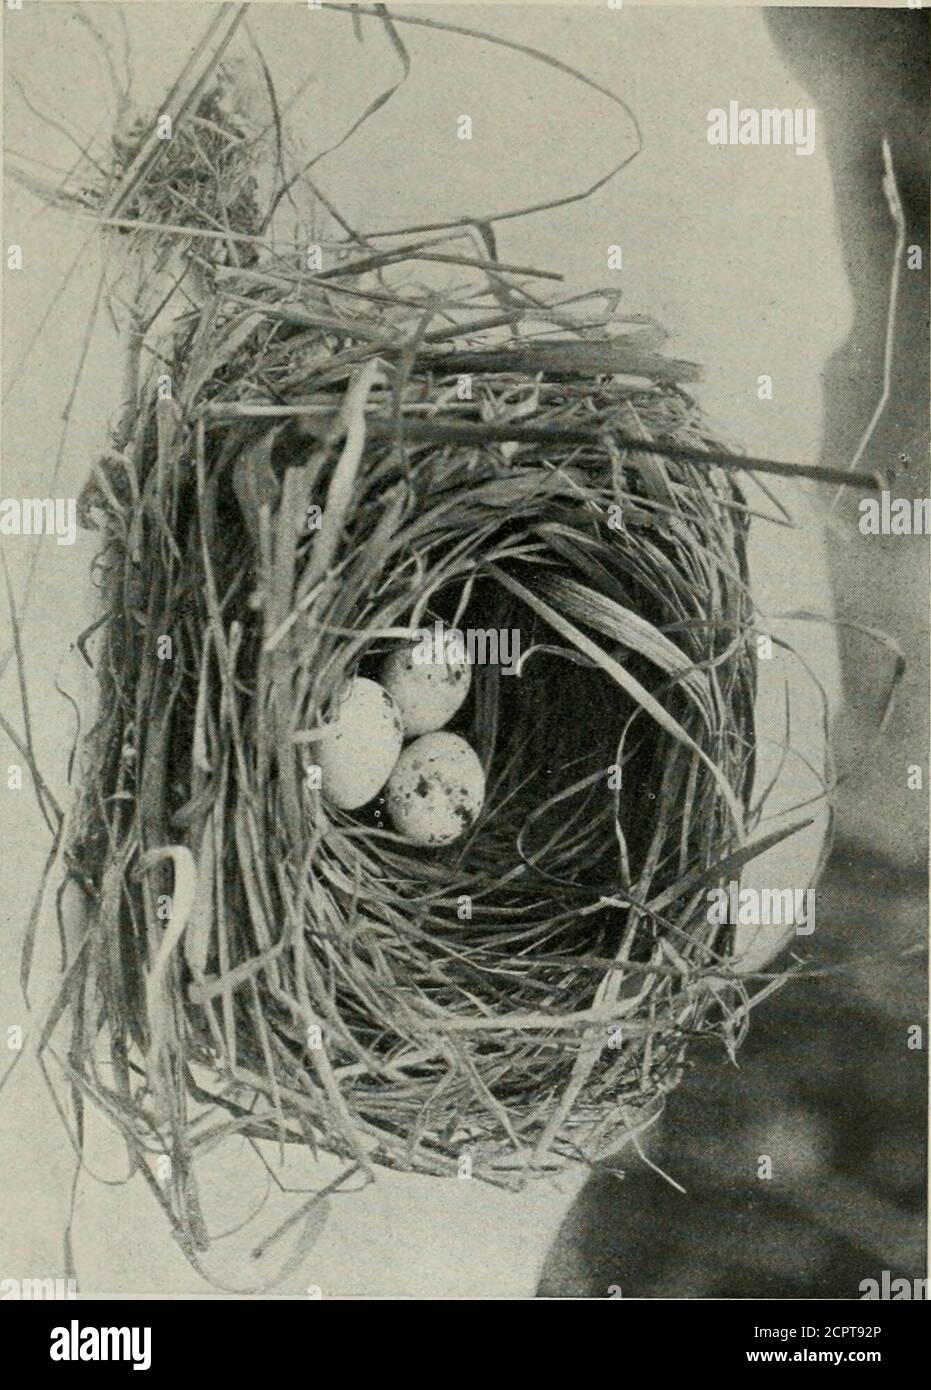 . Bird notes . cold weather not seemingto affect them in the least. Bronzk-wingkd Mannikins {Spennesles cucullata): Have not yetbred, but are now sitting on a clutch of three eggs in a domed nest con-structed in a fir bush. Grekn Amaduvadk {Siictospiza fot tuosa): Have not bred thisseasonthough a nest was built and several eggs were laid a week or two ago, butdid not hatch out, as they weie out of doors and the eggs were probablyspoiled by frost. Grkkn vSinGing Finch (Serinus iclerus): Did not breed till quiterecently, they had three young nicely feathered, but the cold of a few weeksago was t Stock Photo